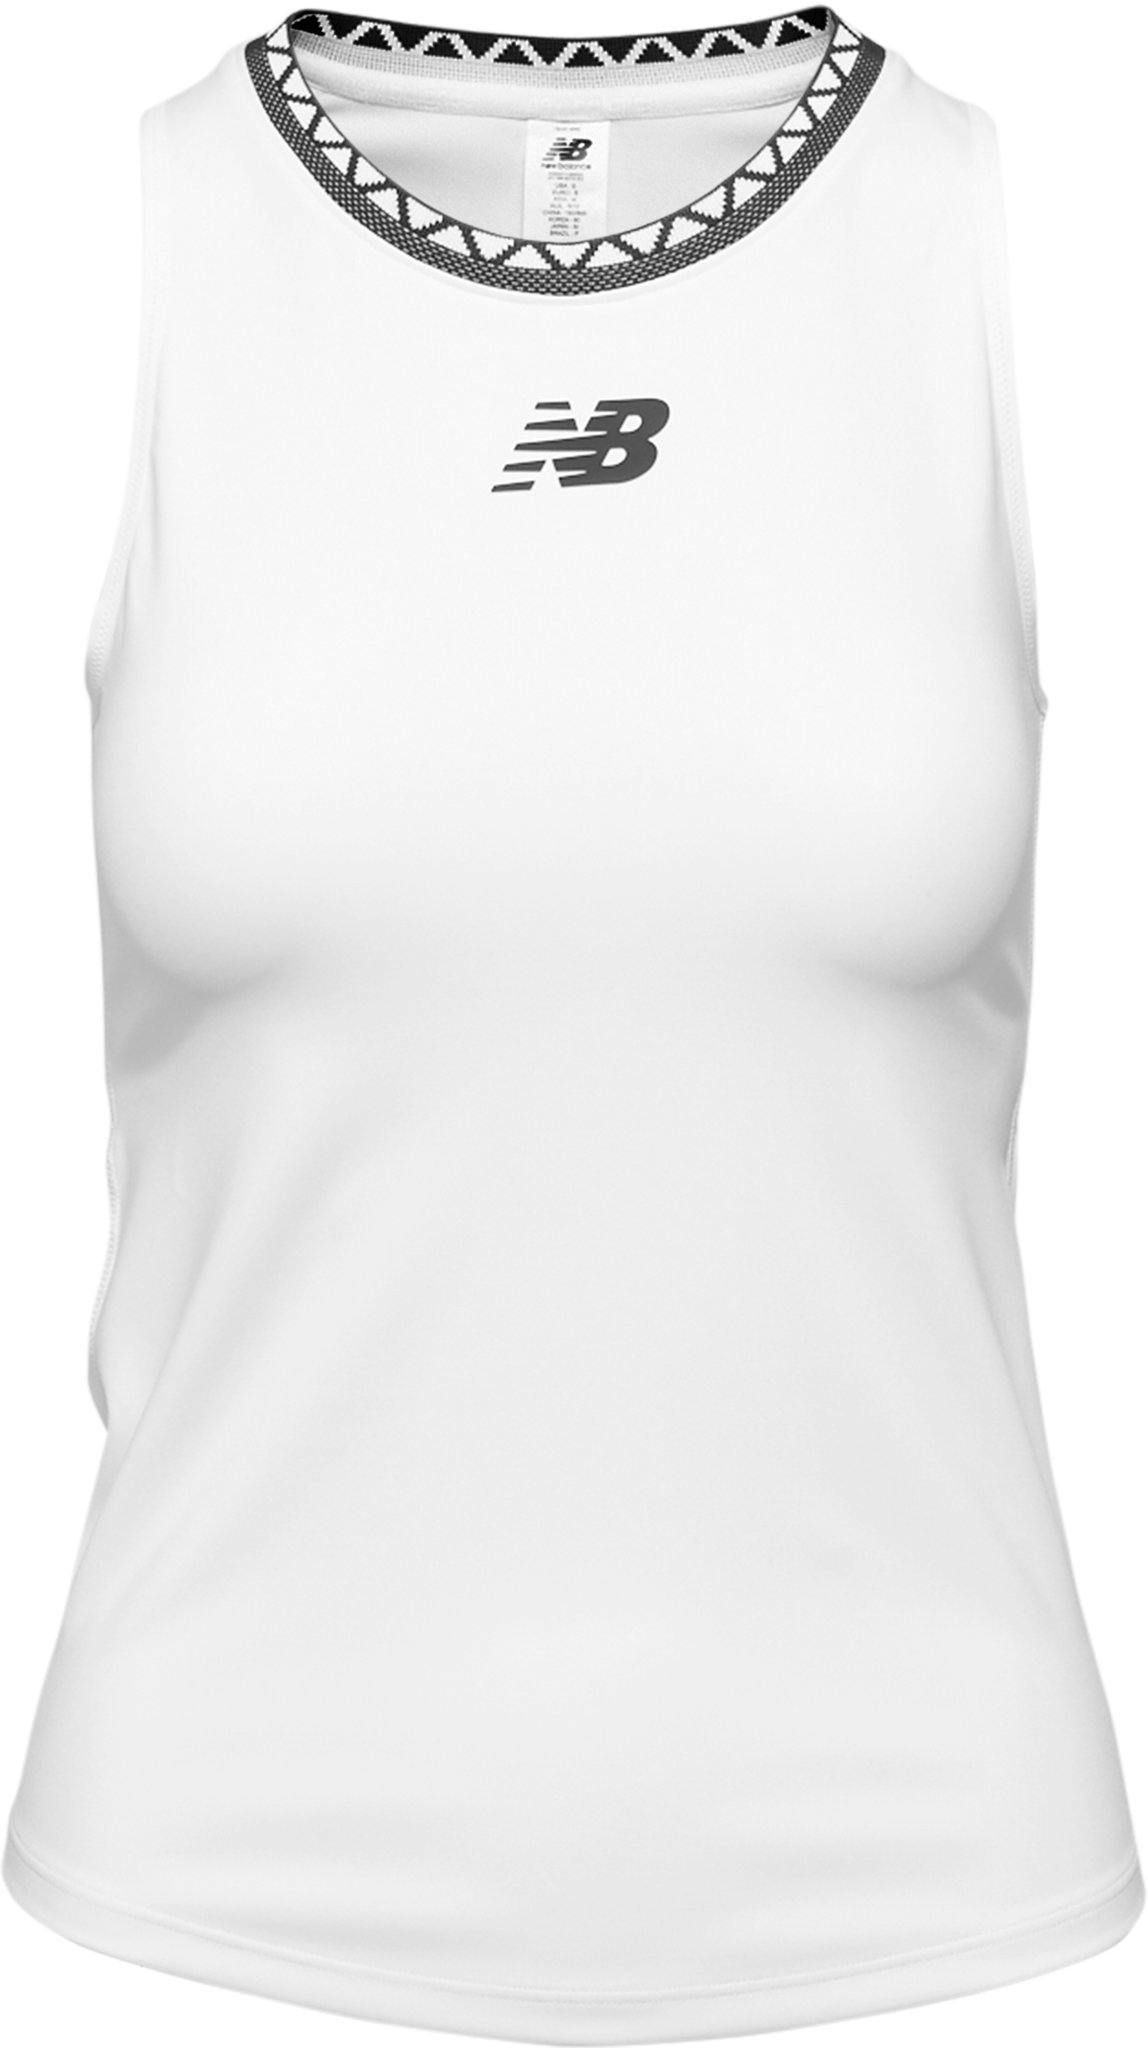 Product image for Tournament Tank - Women’s